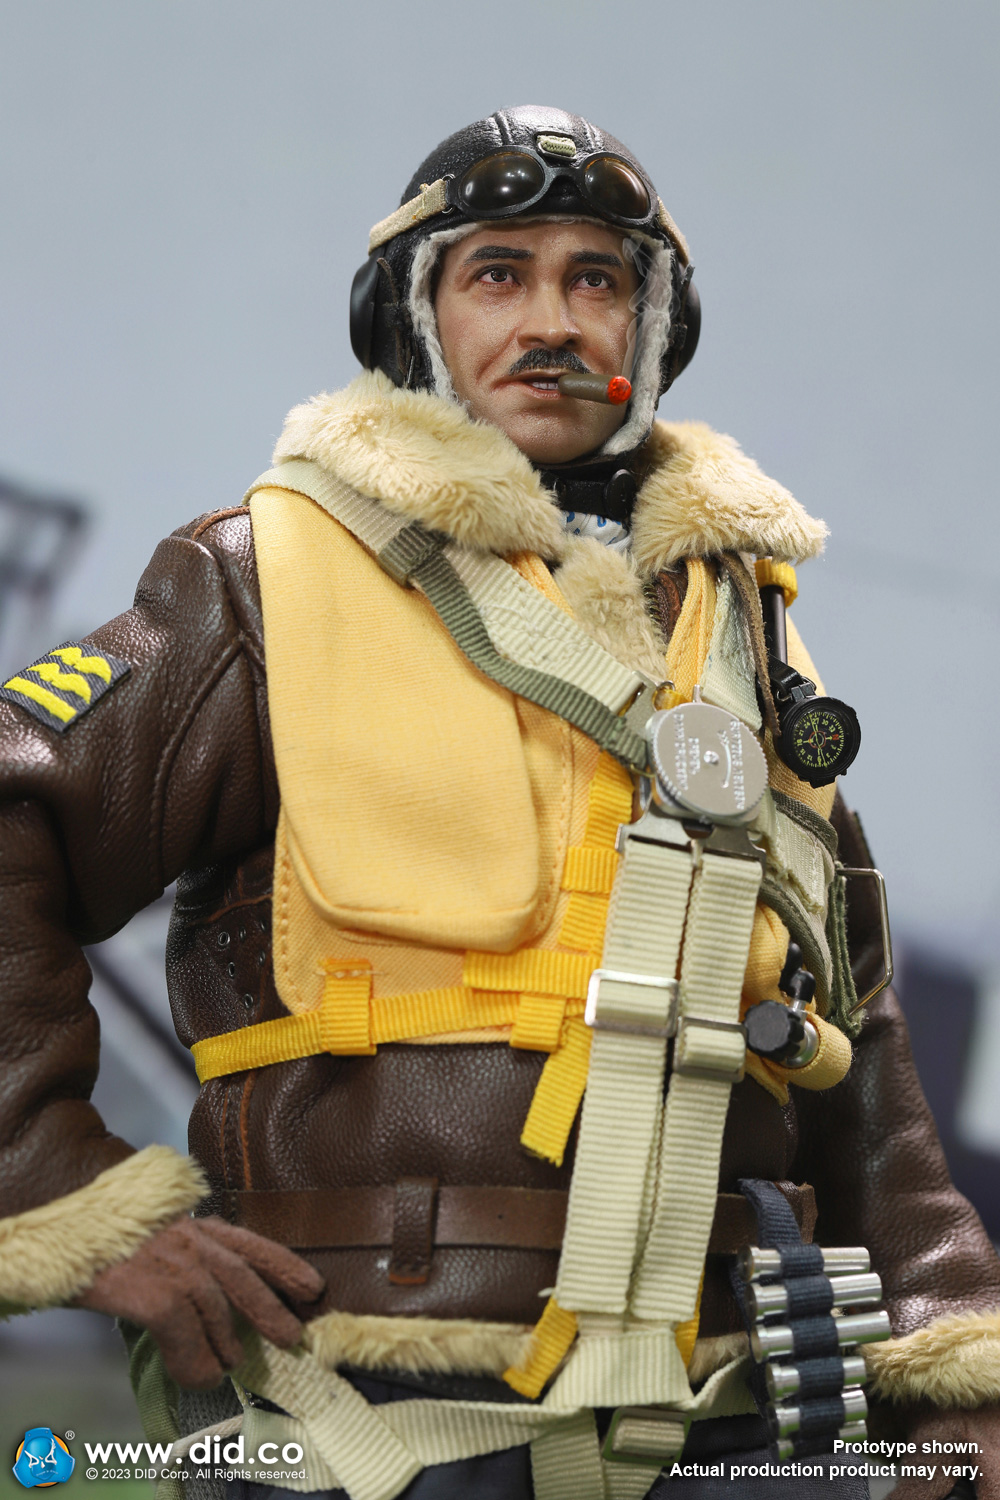 newproduct - NEW PRODUCT: DiD: D80165 WWII German Luftwaffe Ace Pilot – Adolf Galland 1232